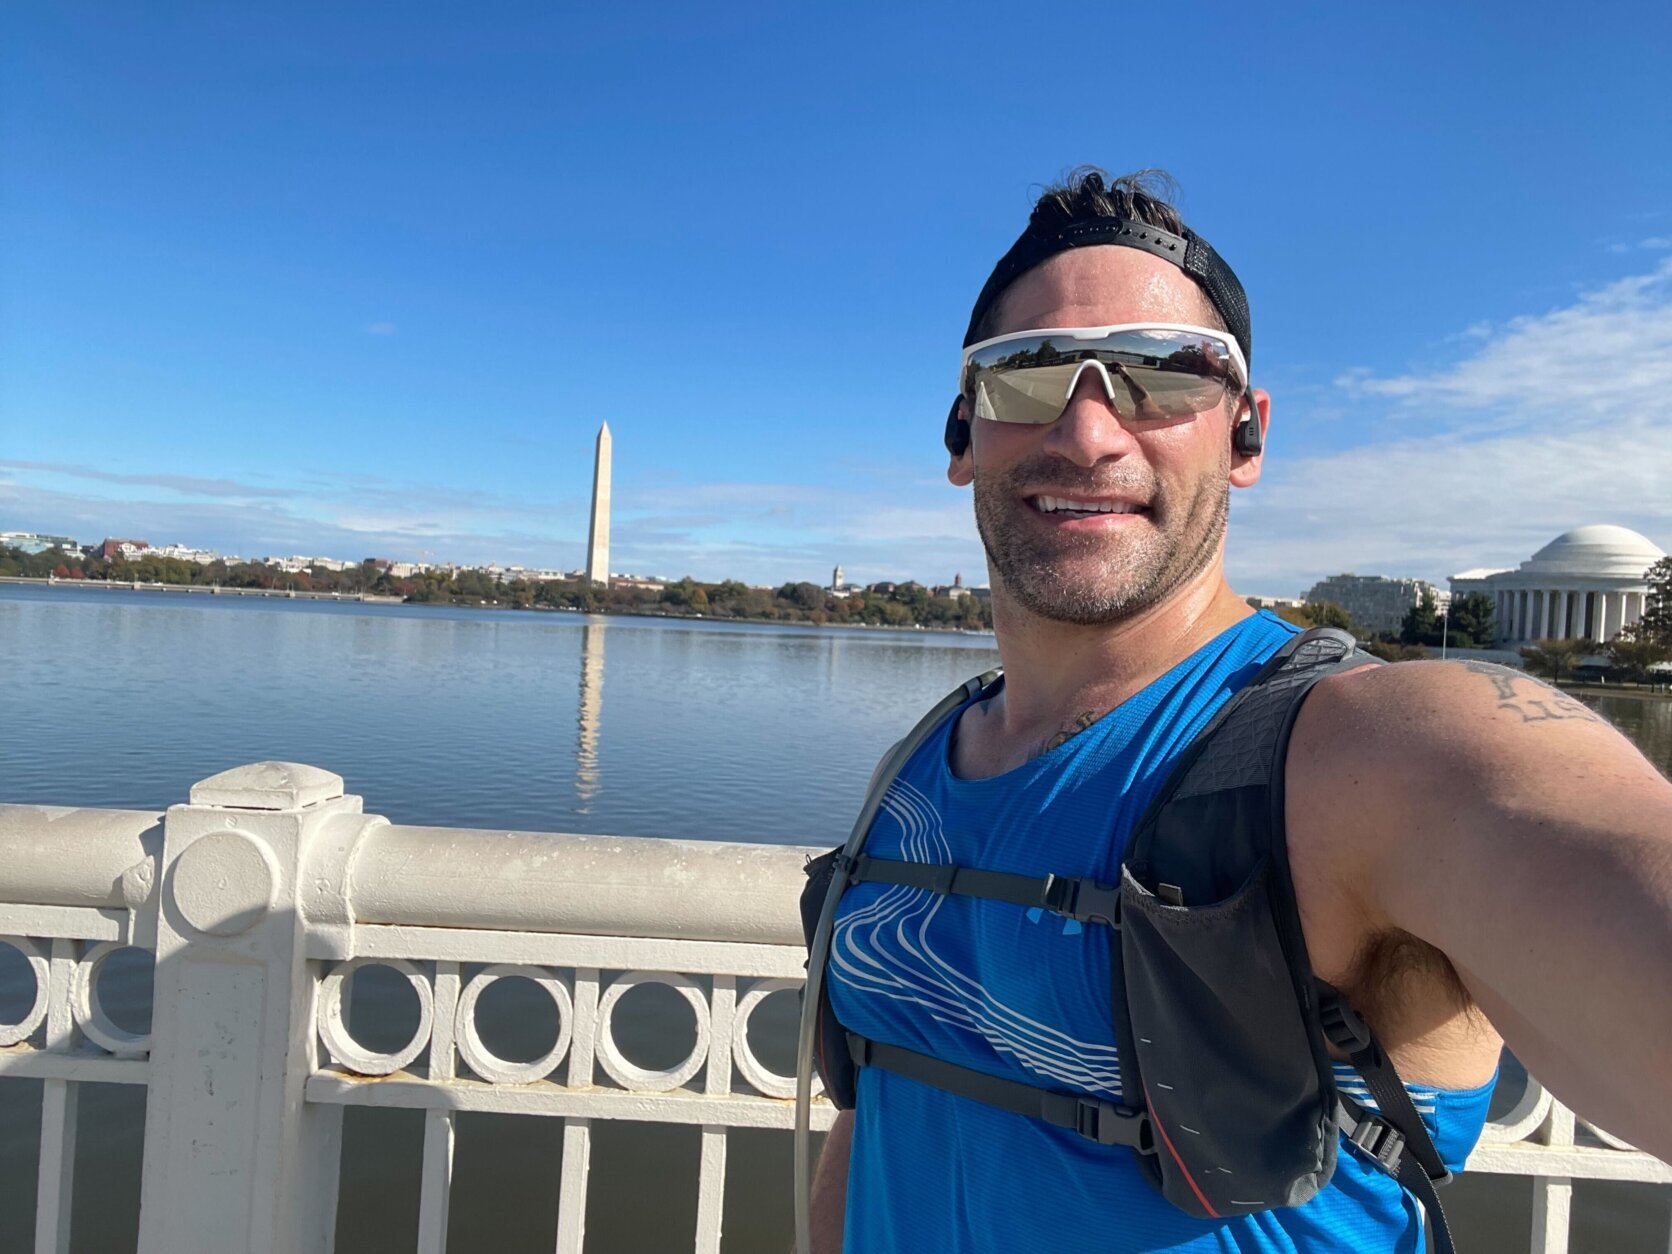 Phil Pinti running with Washington Monument in the background